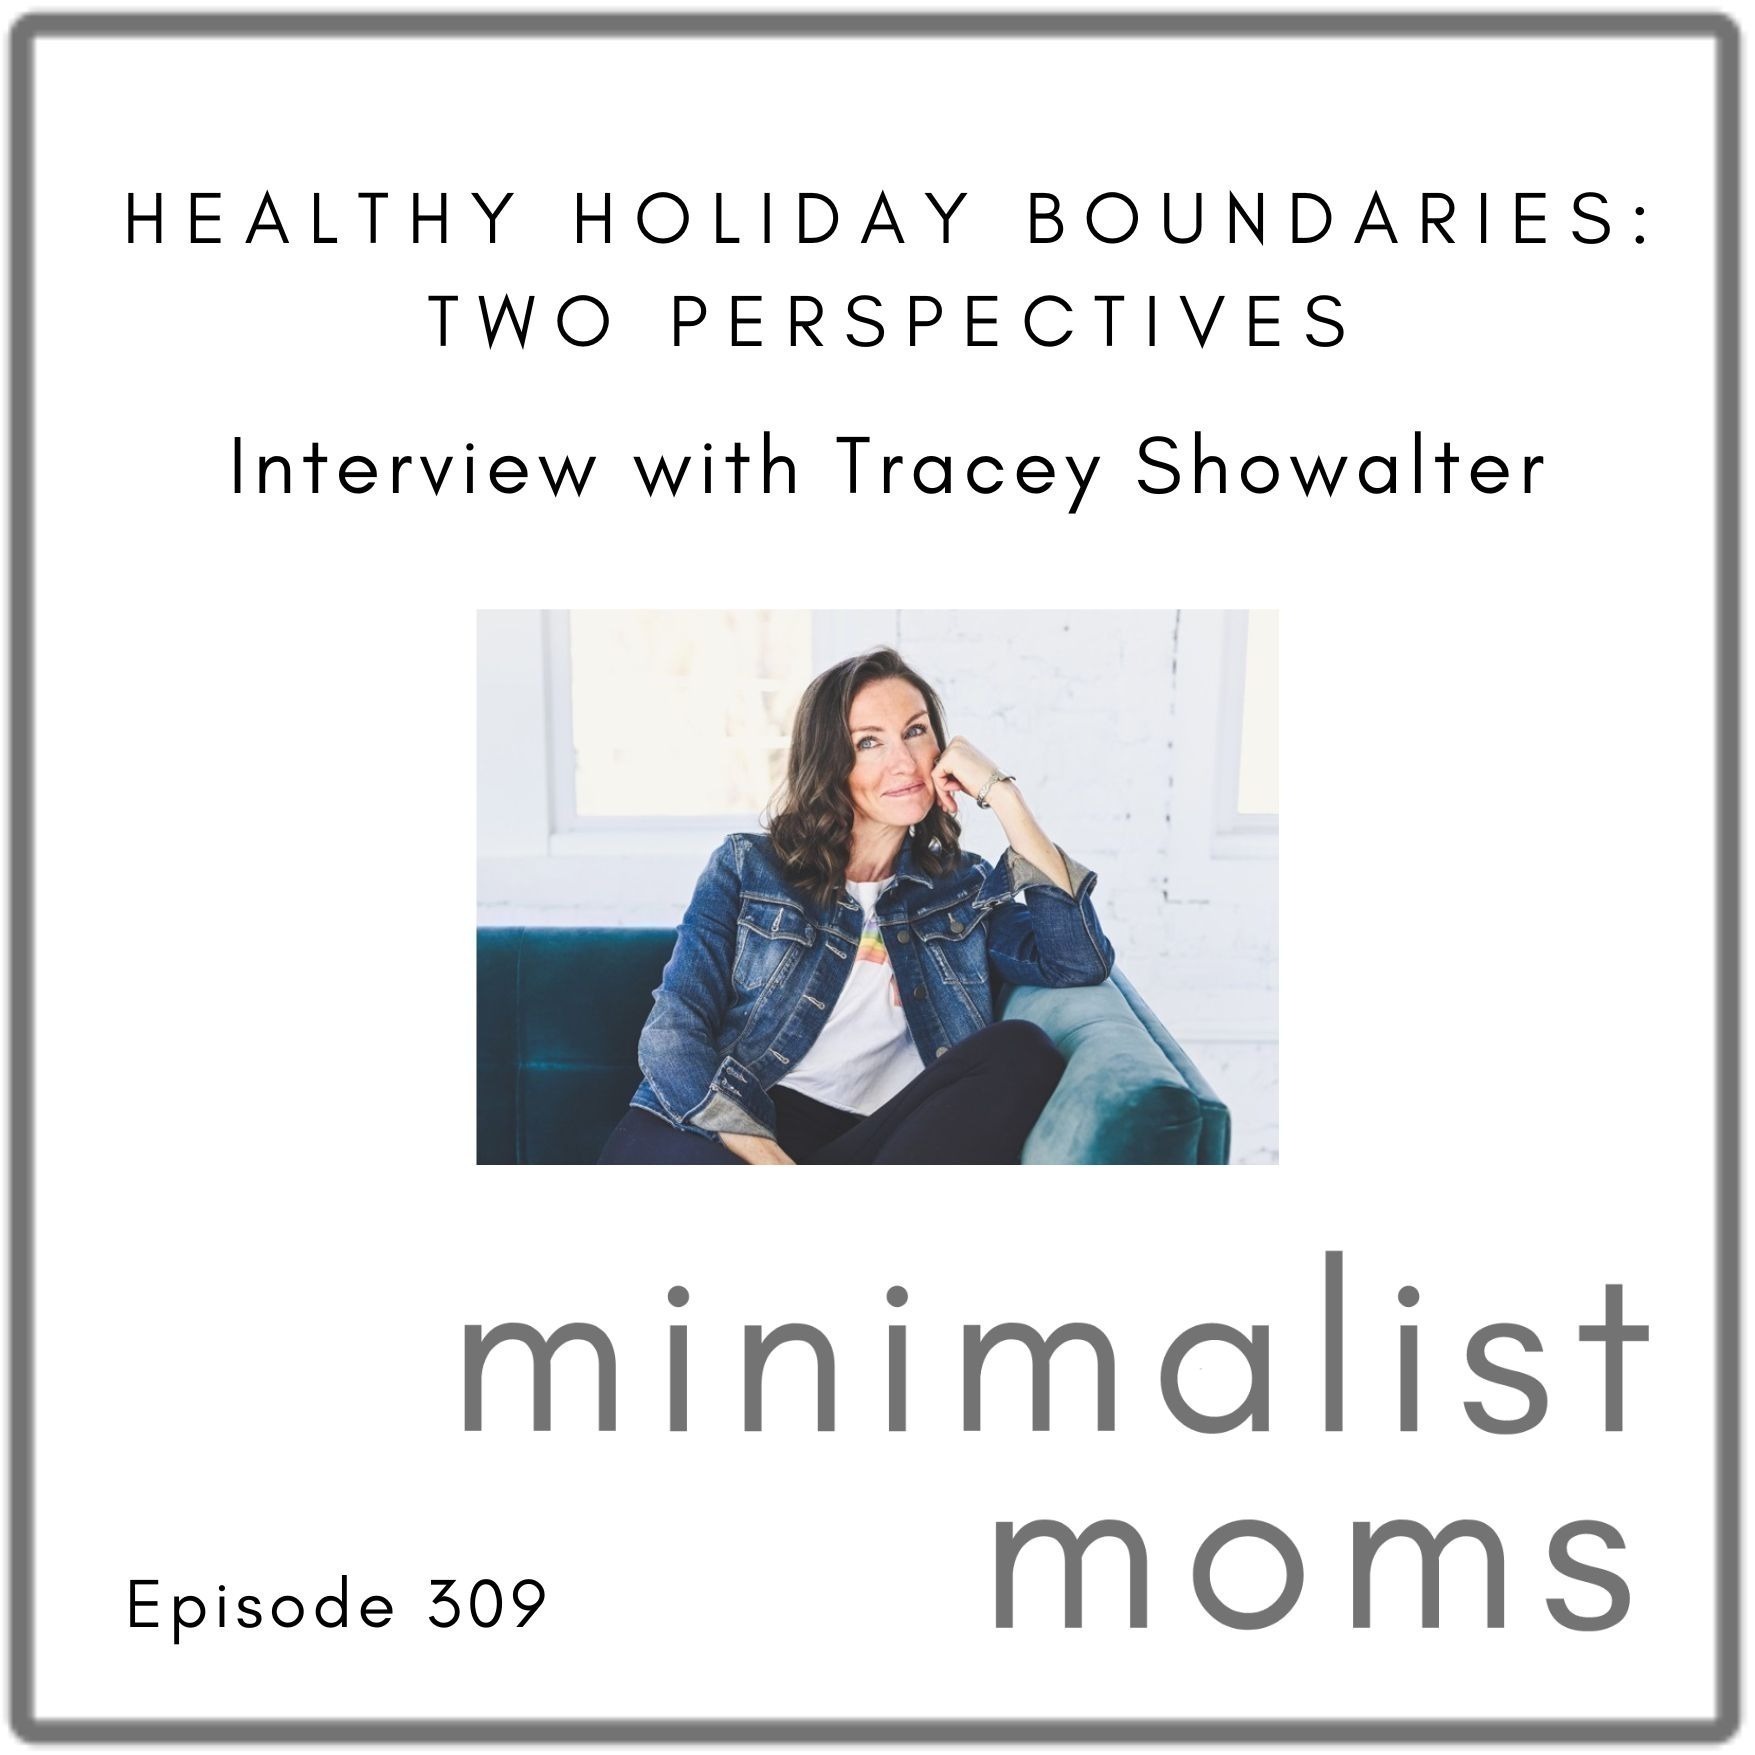 Healthy Holiday Boundaries: Two Perspectives with Tracey Showalter (EP309)